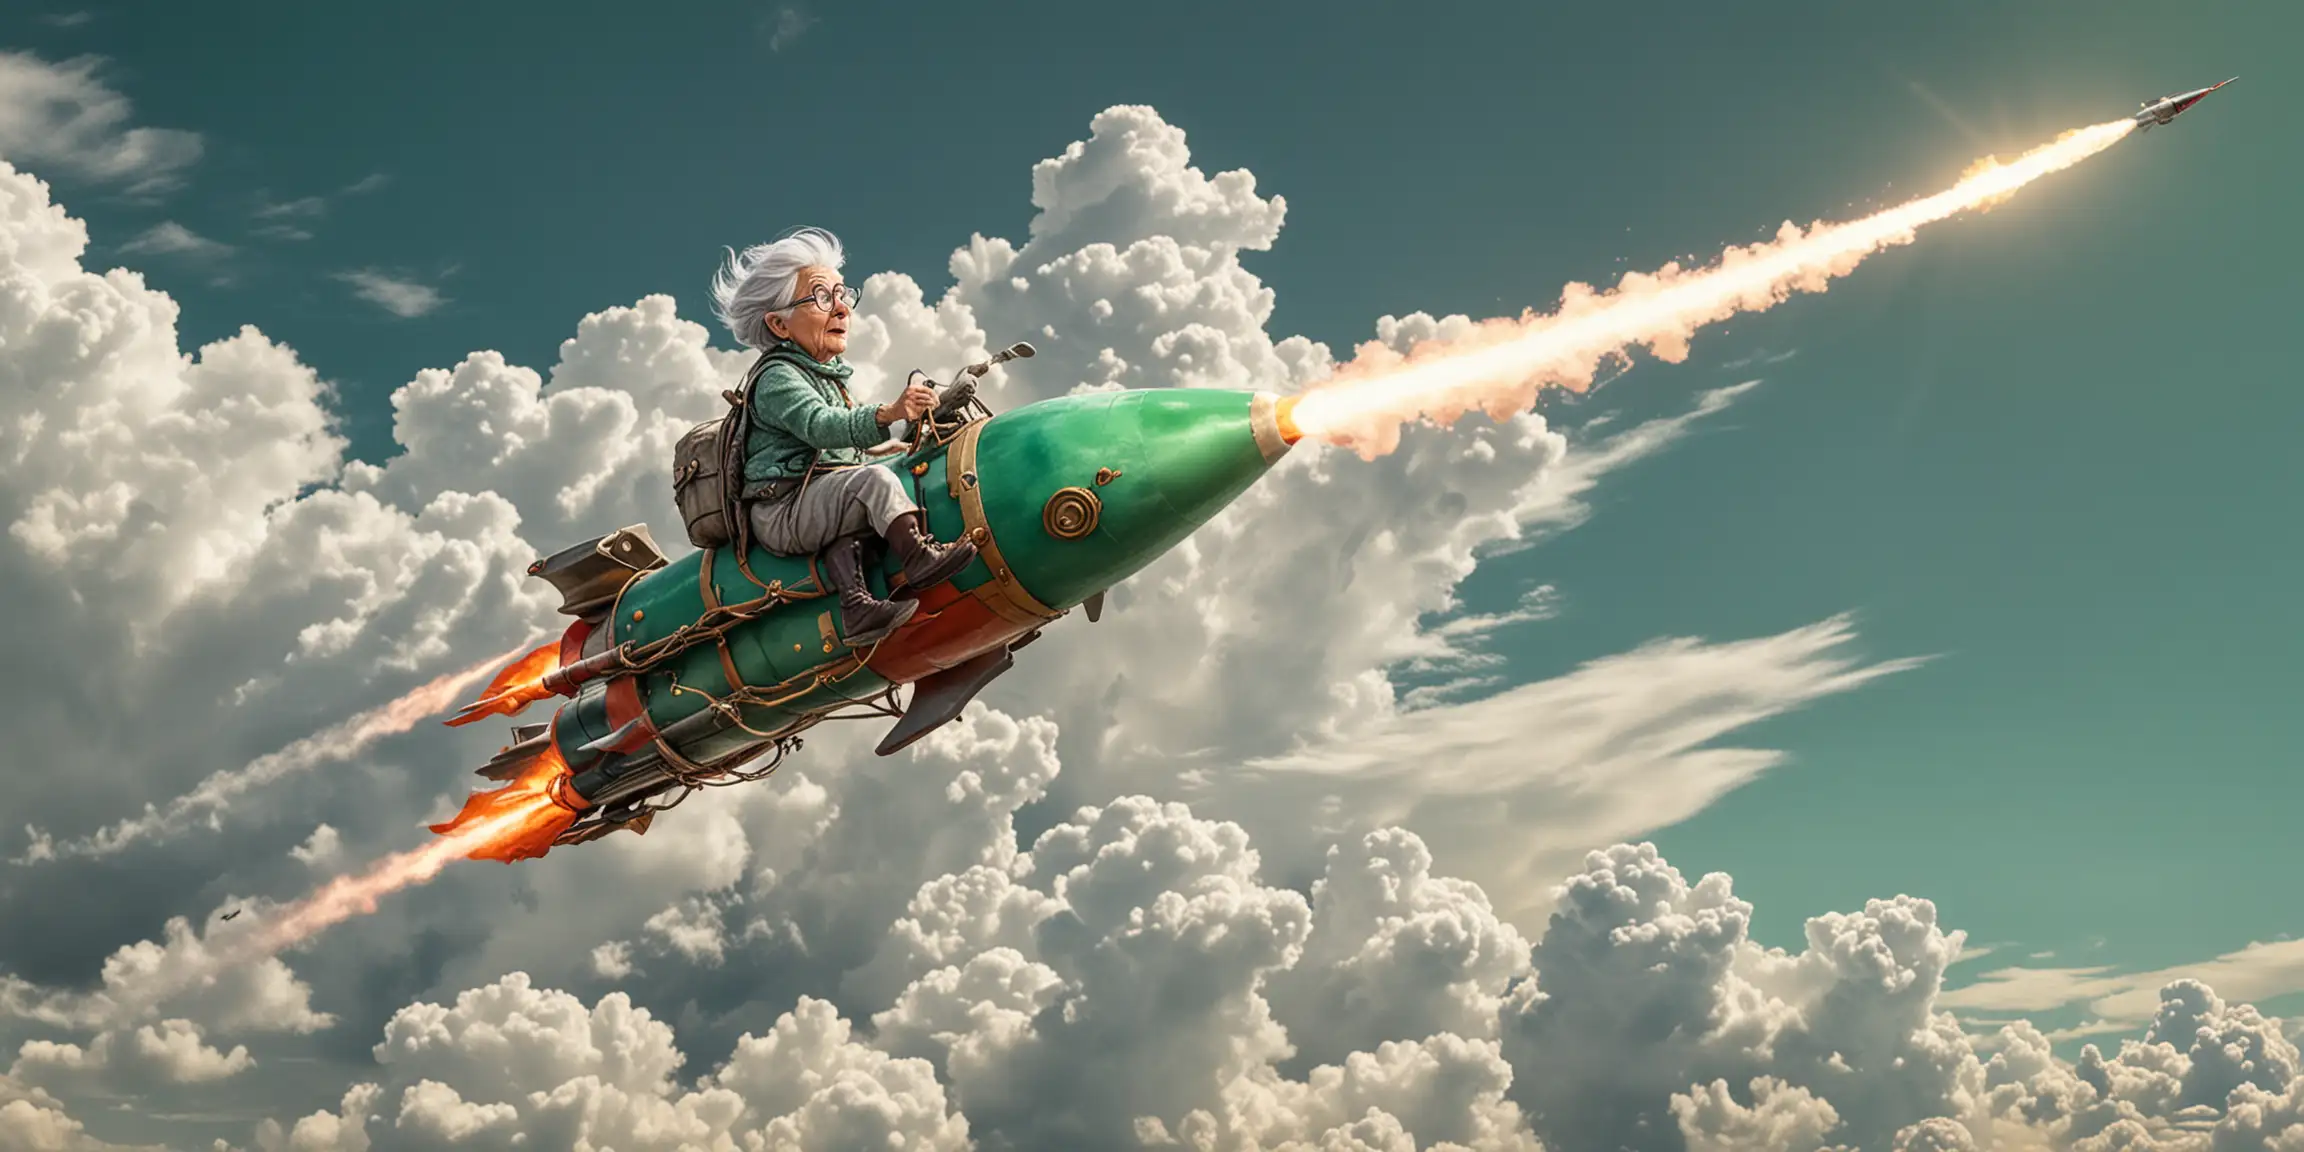 Elderly Woman Riding Rocket in Emerald Sky with Puffy Clouds